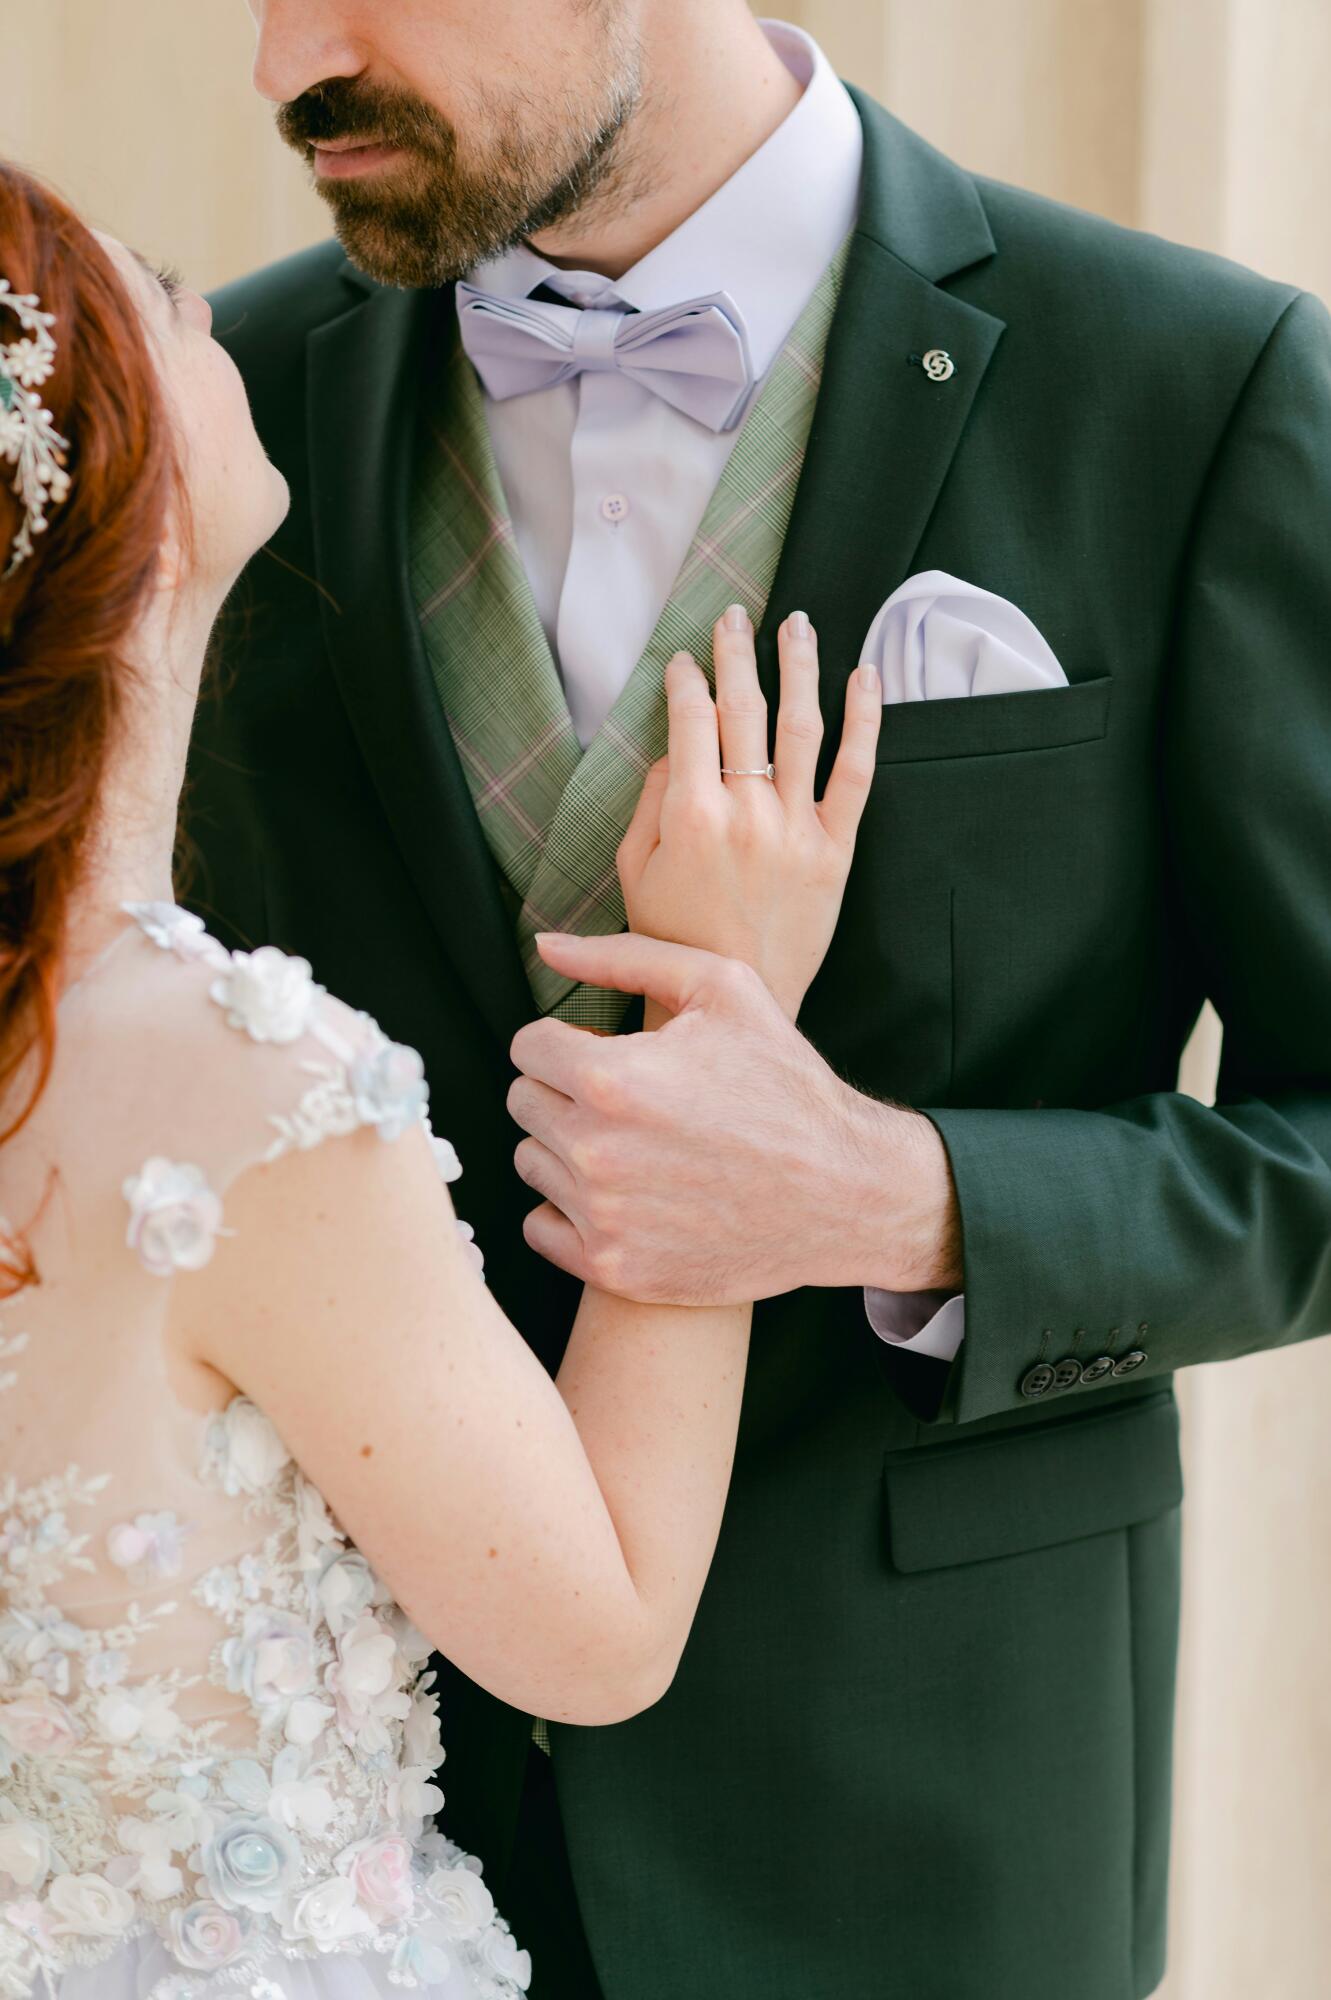 The Top 9 Must-Have Groom Outfit Items for Your Wedding Day